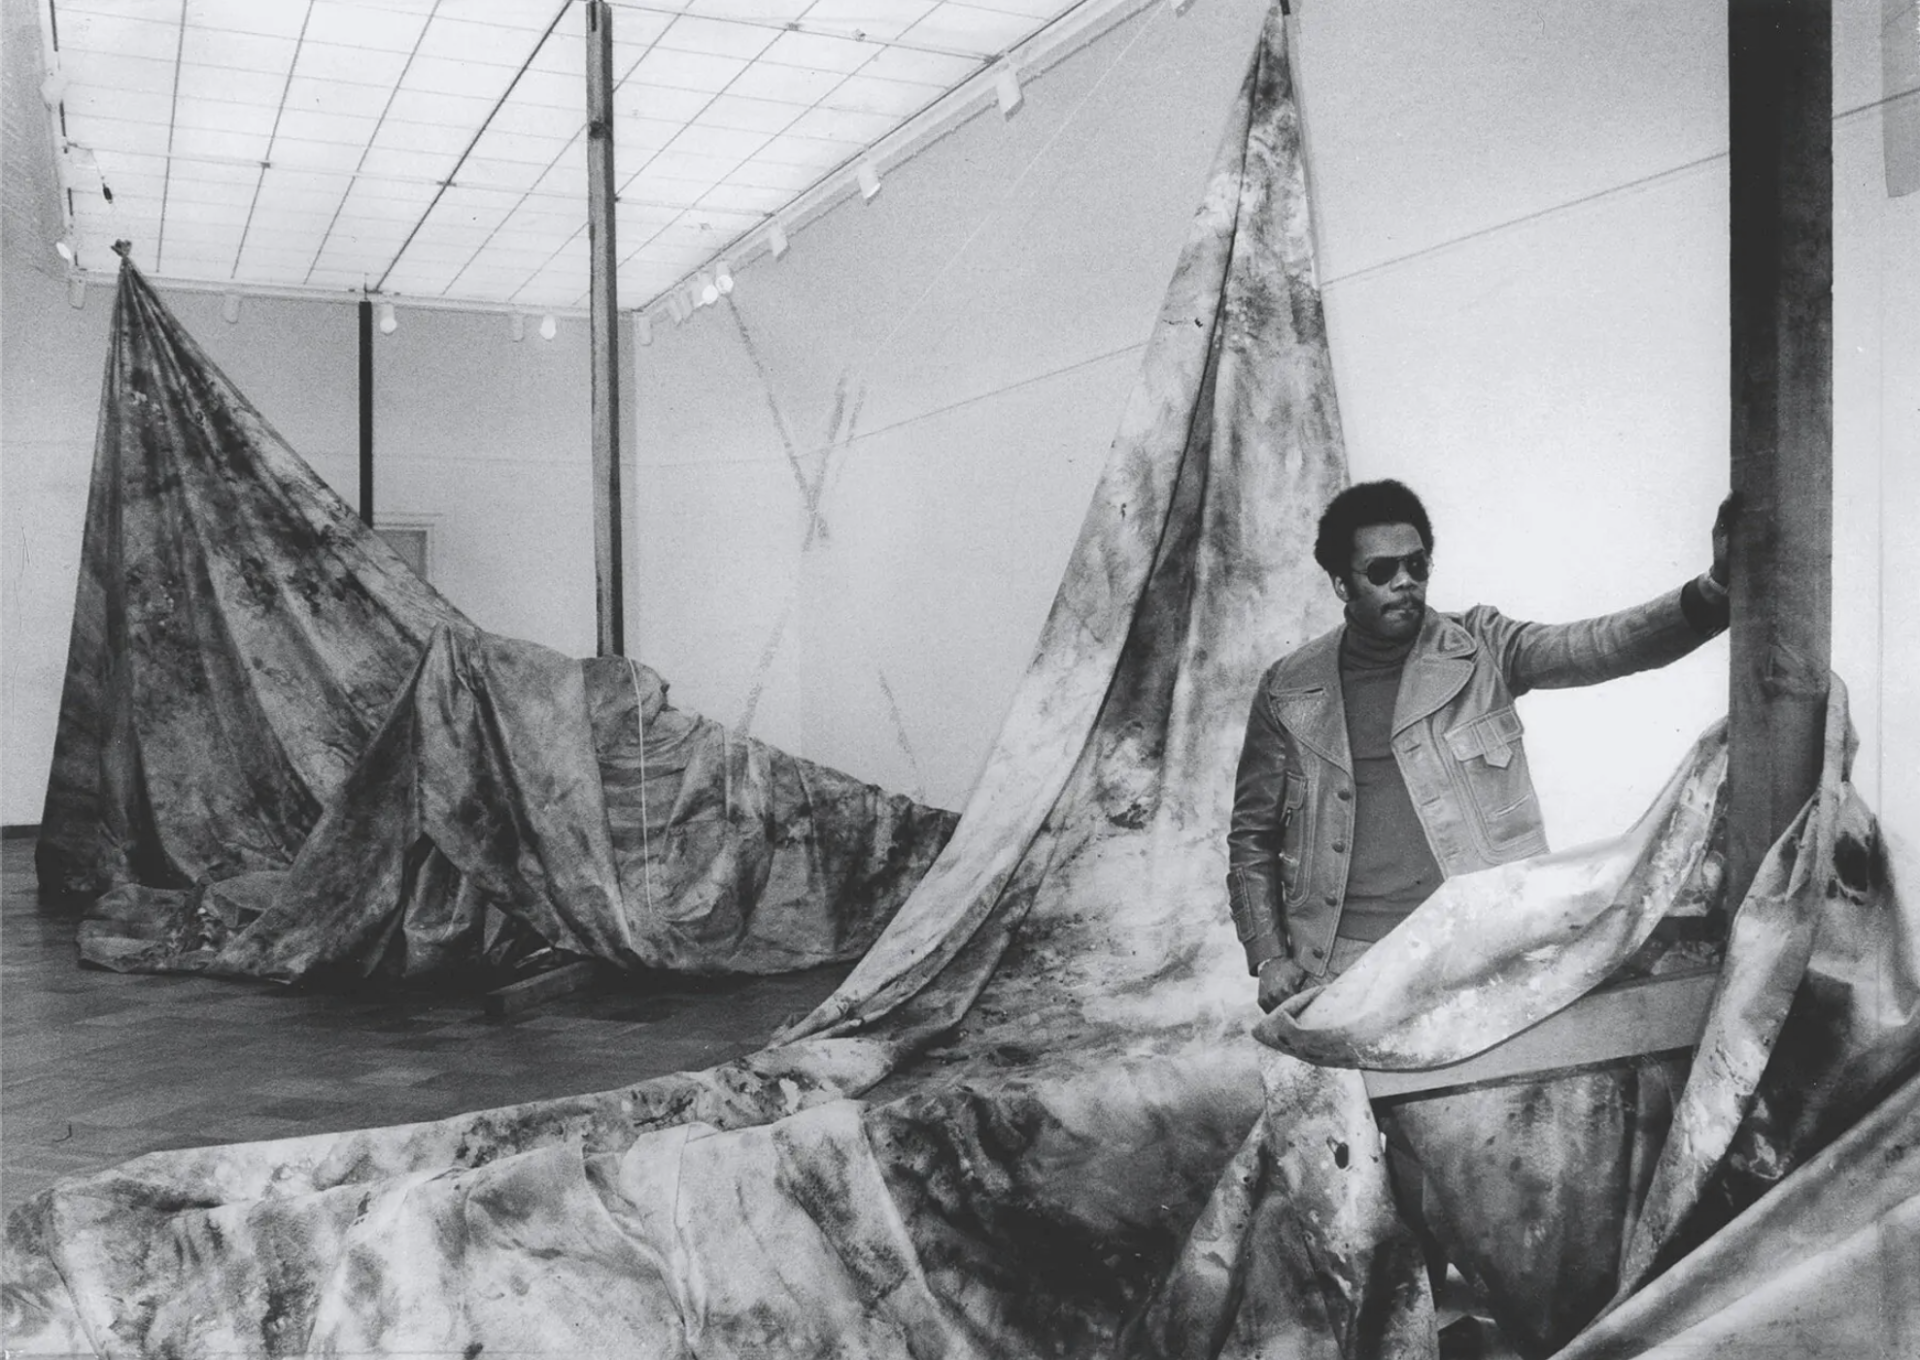 Mr. Gilliam’s “Autumn Surf” installation in 1973 at the San Francisco Museum of Modern Art. He was known to drape his canvases from ceilings in great curves and loops. Credit: Art Frisch/San Francisco Chronicle